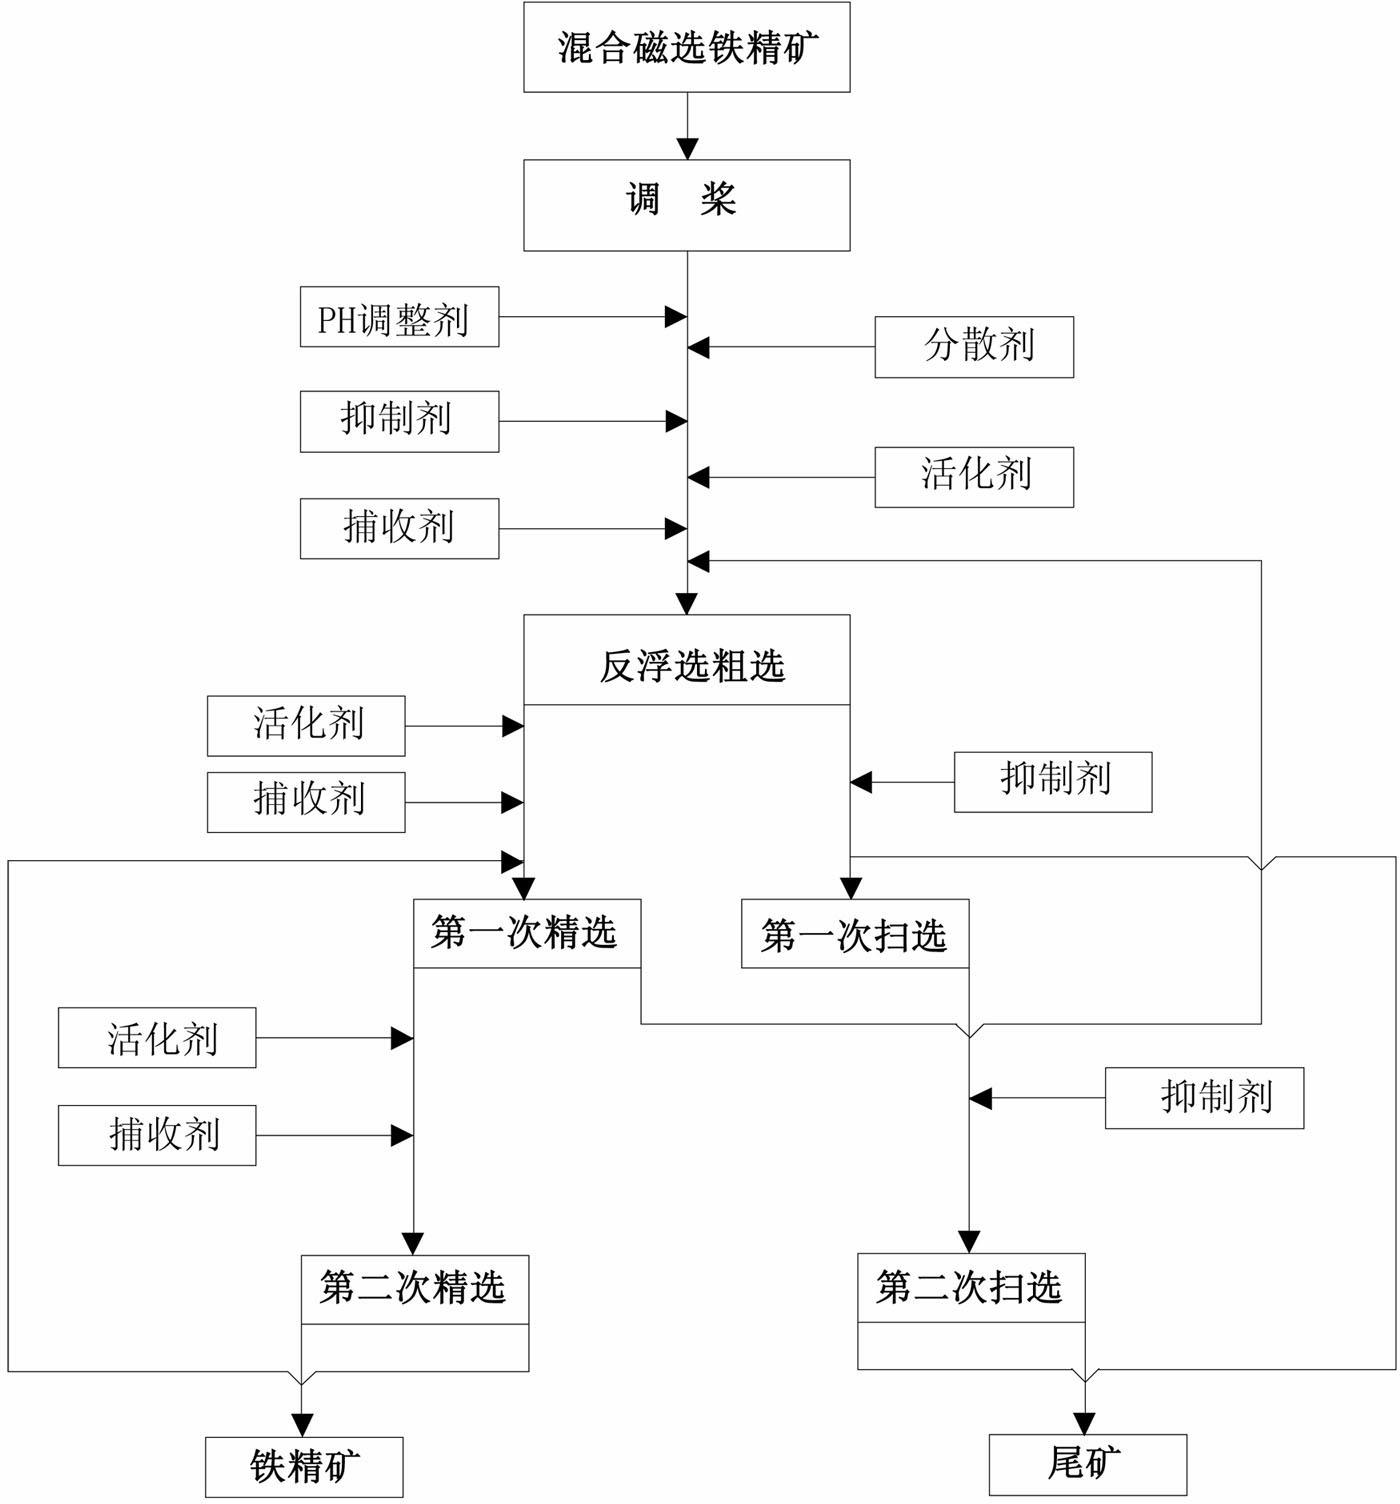 Dispersed flotation separation method for carbonate-containing iron ore